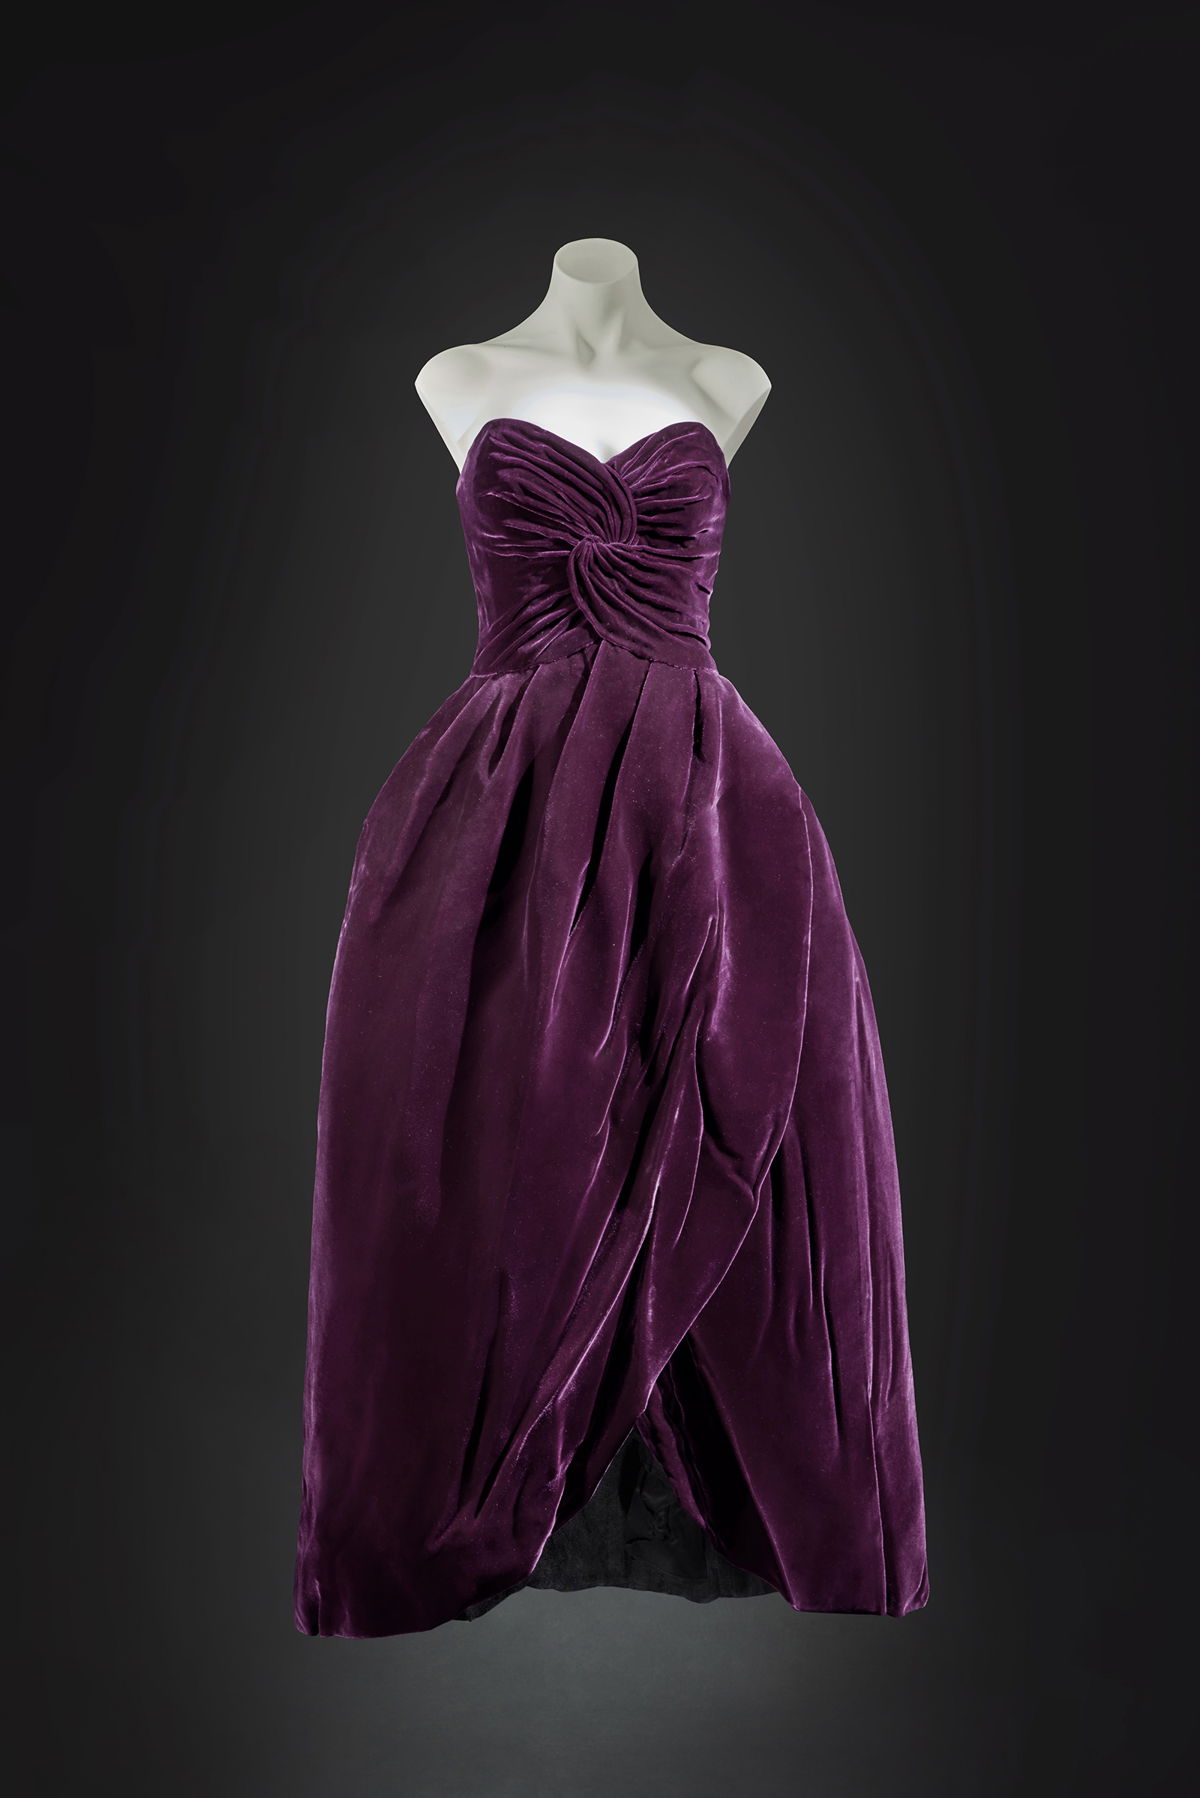 <i>Sotheby's</i><br/>Princess Diana's aubergine velvet ballgown is going up for sale for the first time in 25 years.